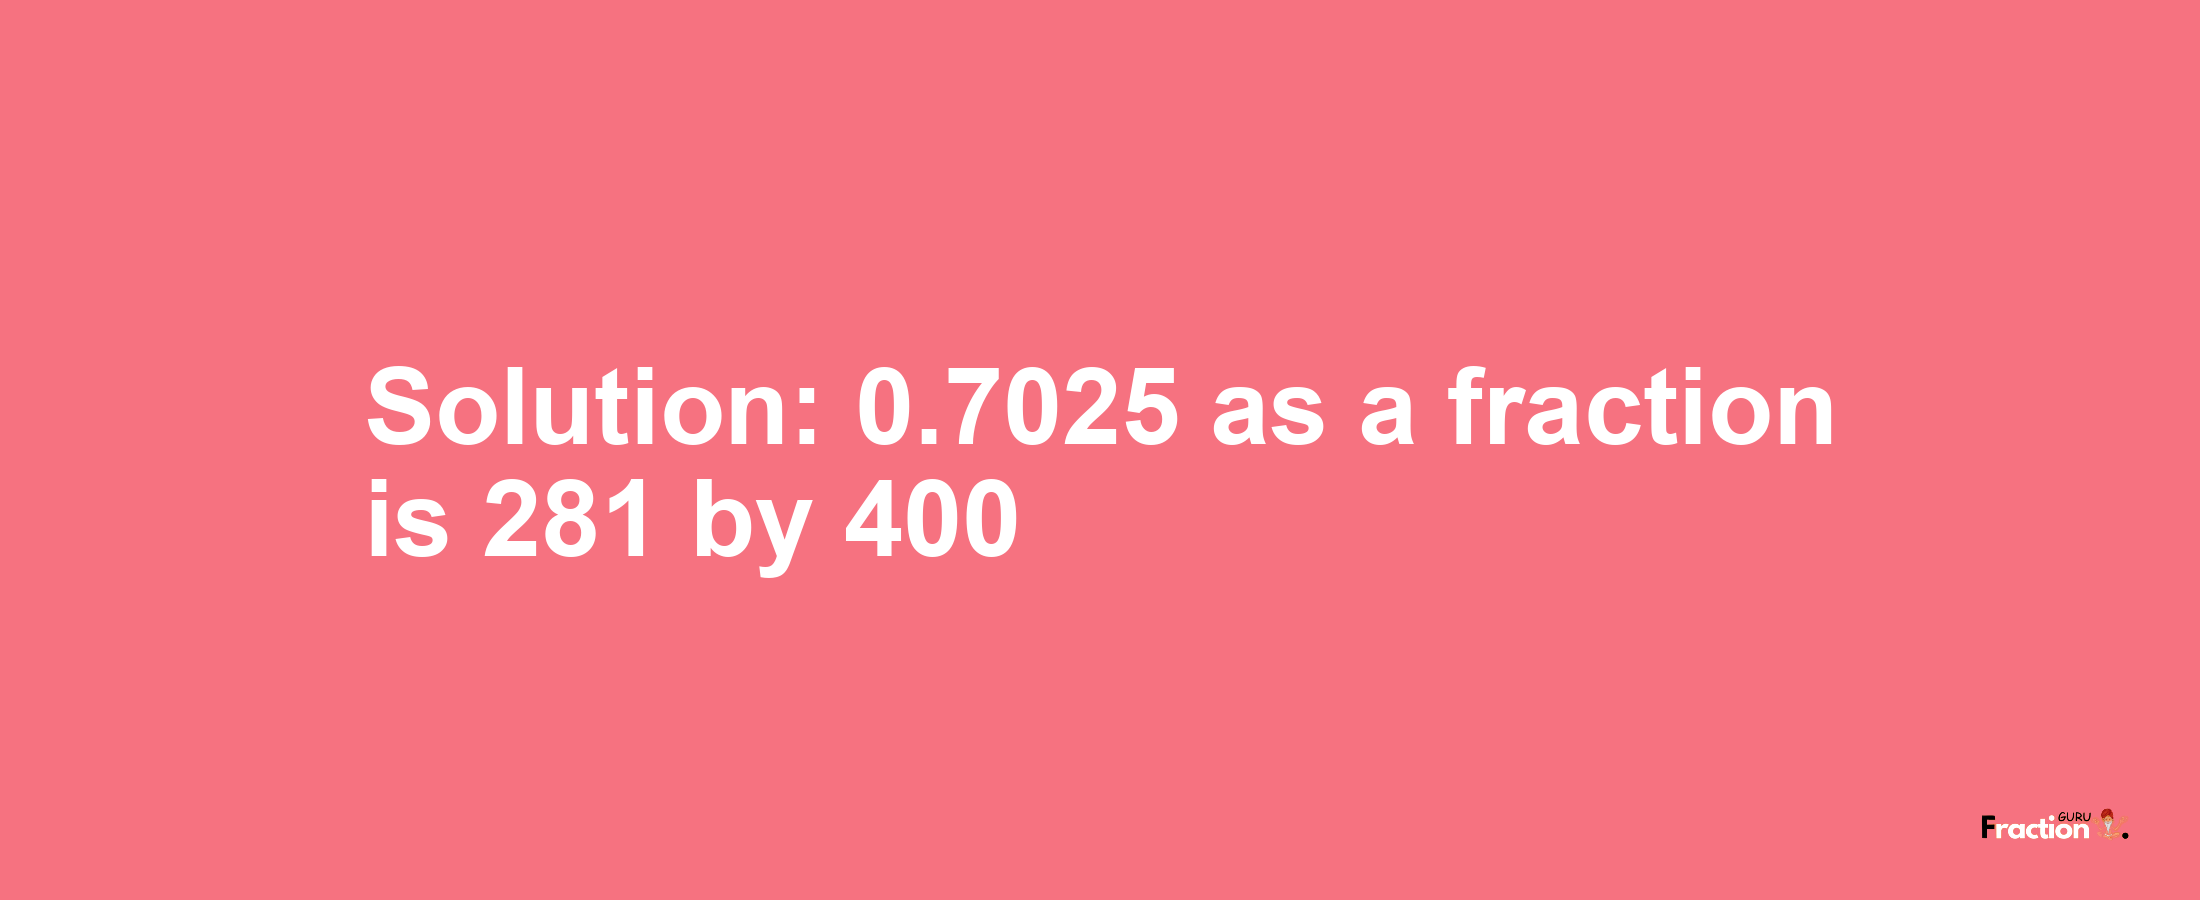 Solution:0.7025 as a fraction is 281/400